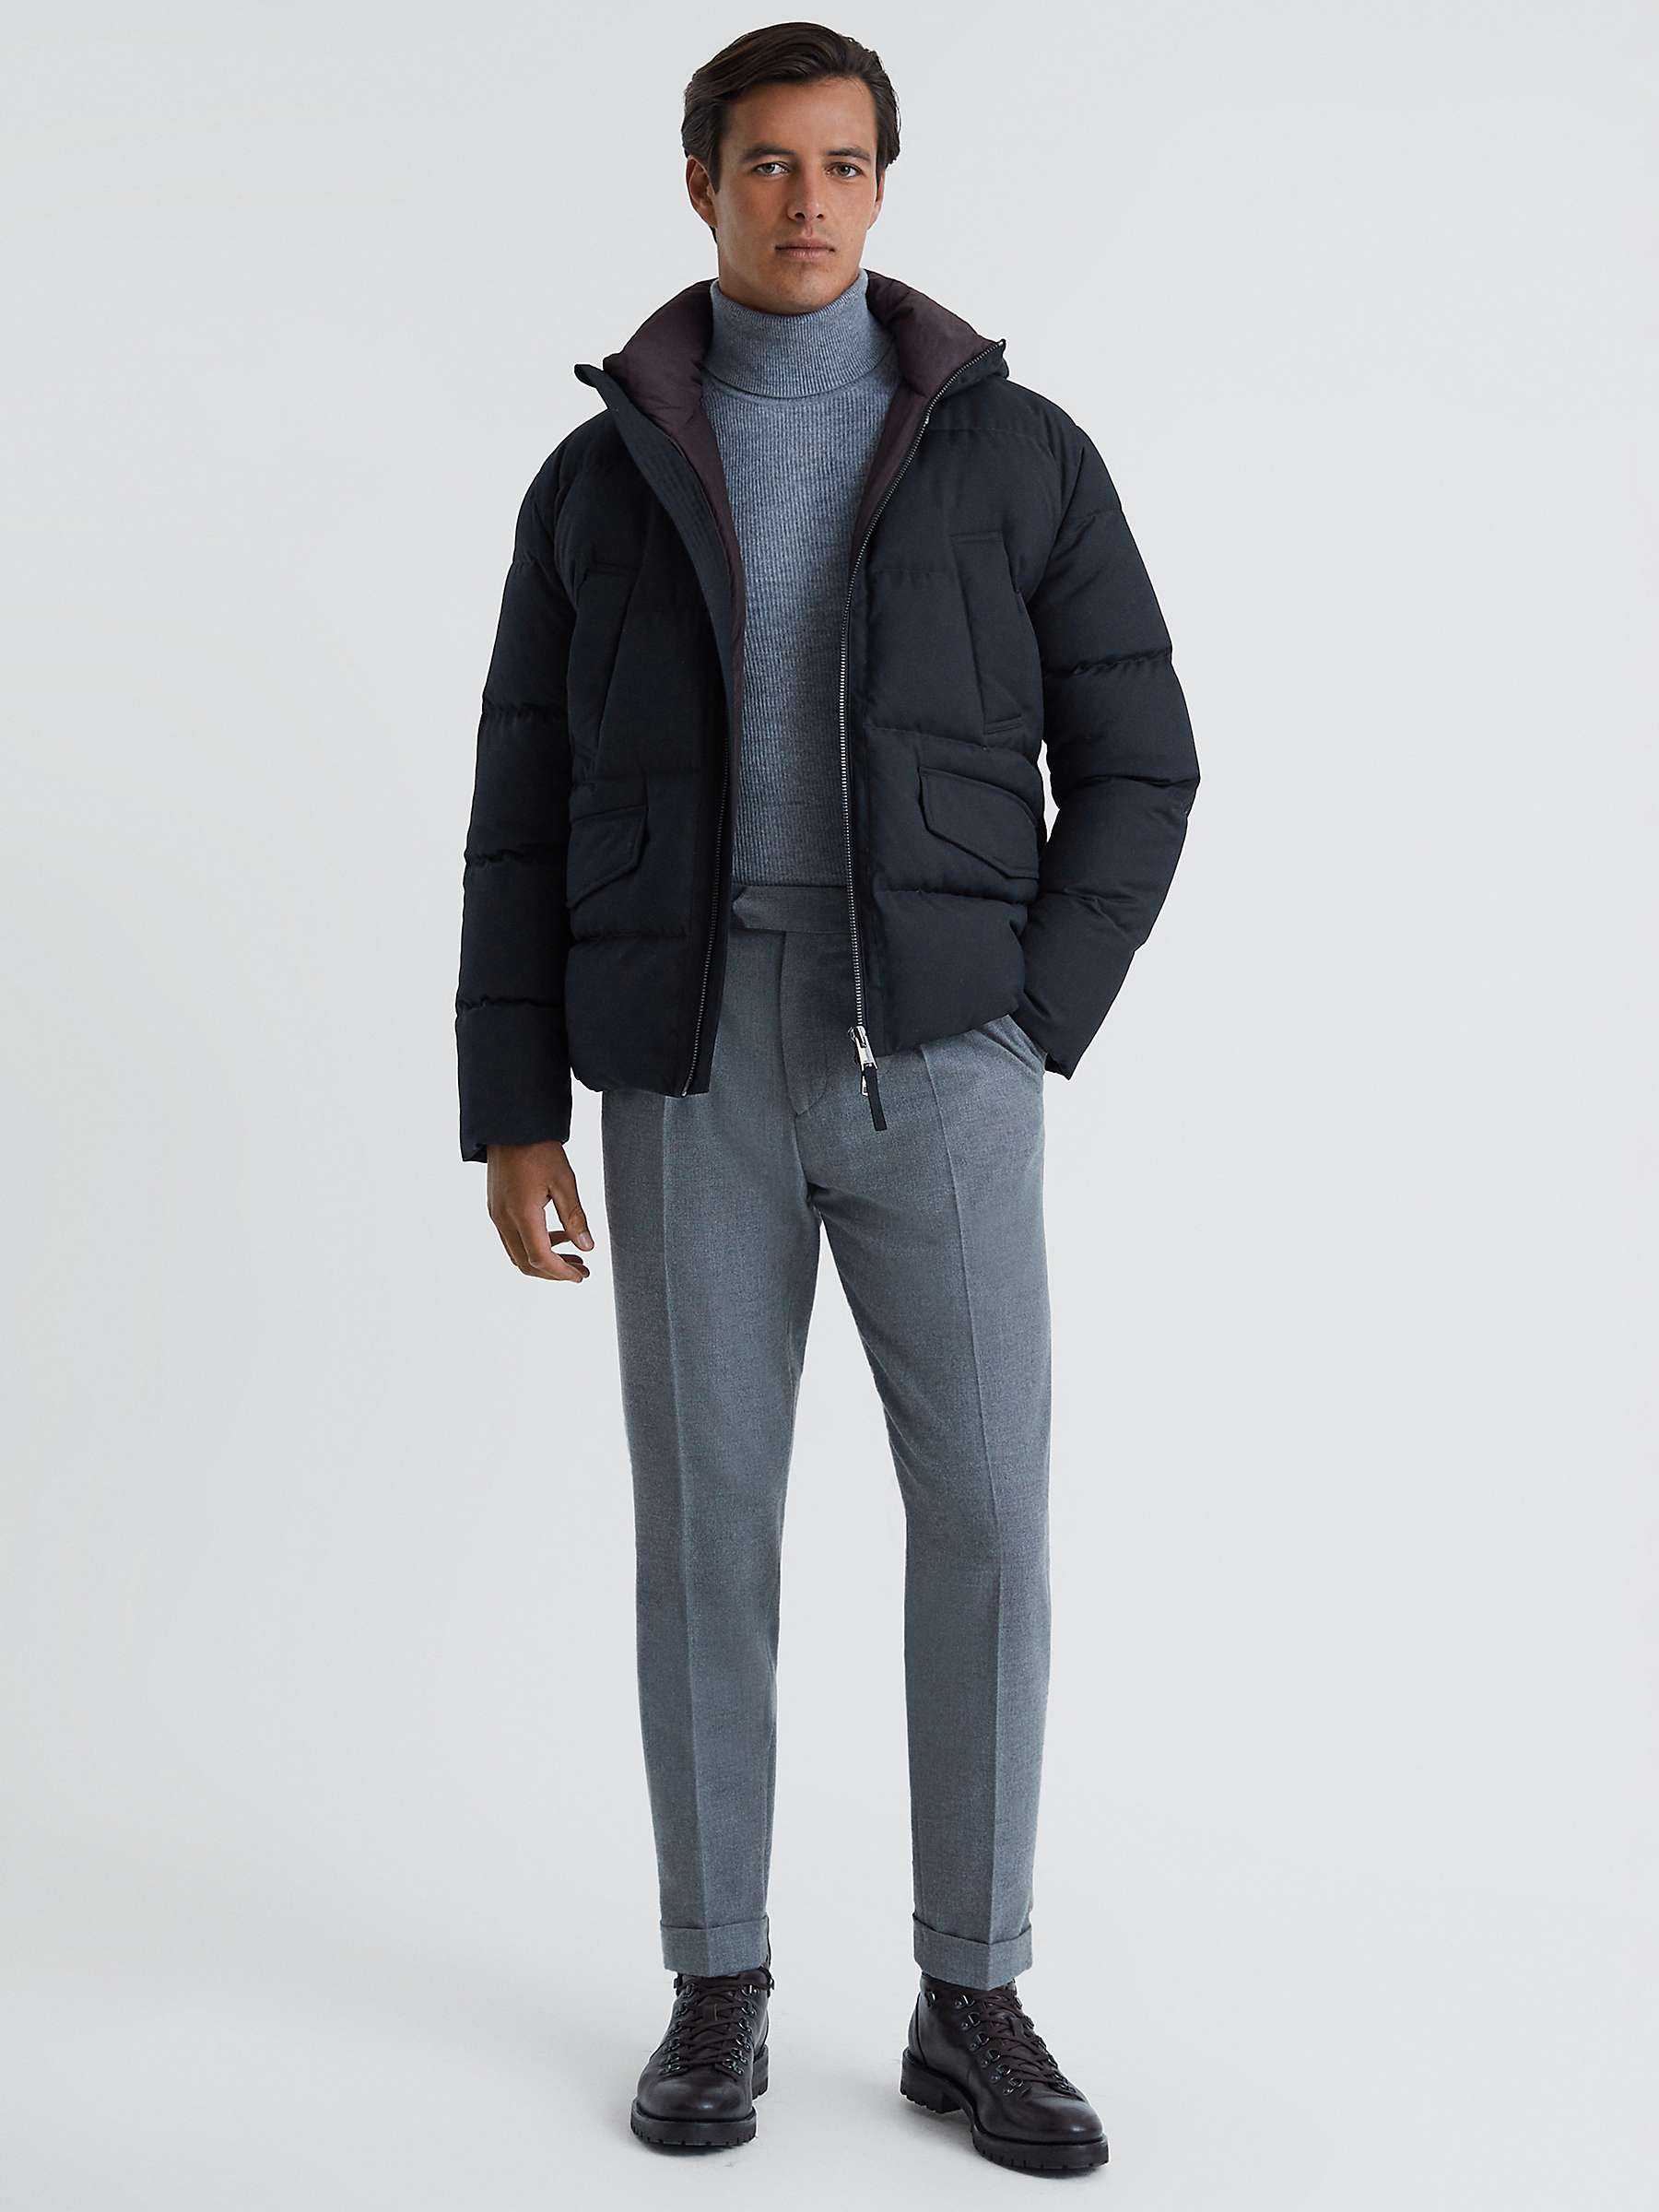 Reiss Ronic Mid Length Puffer Jacket, Navy at John Lewis & Partners